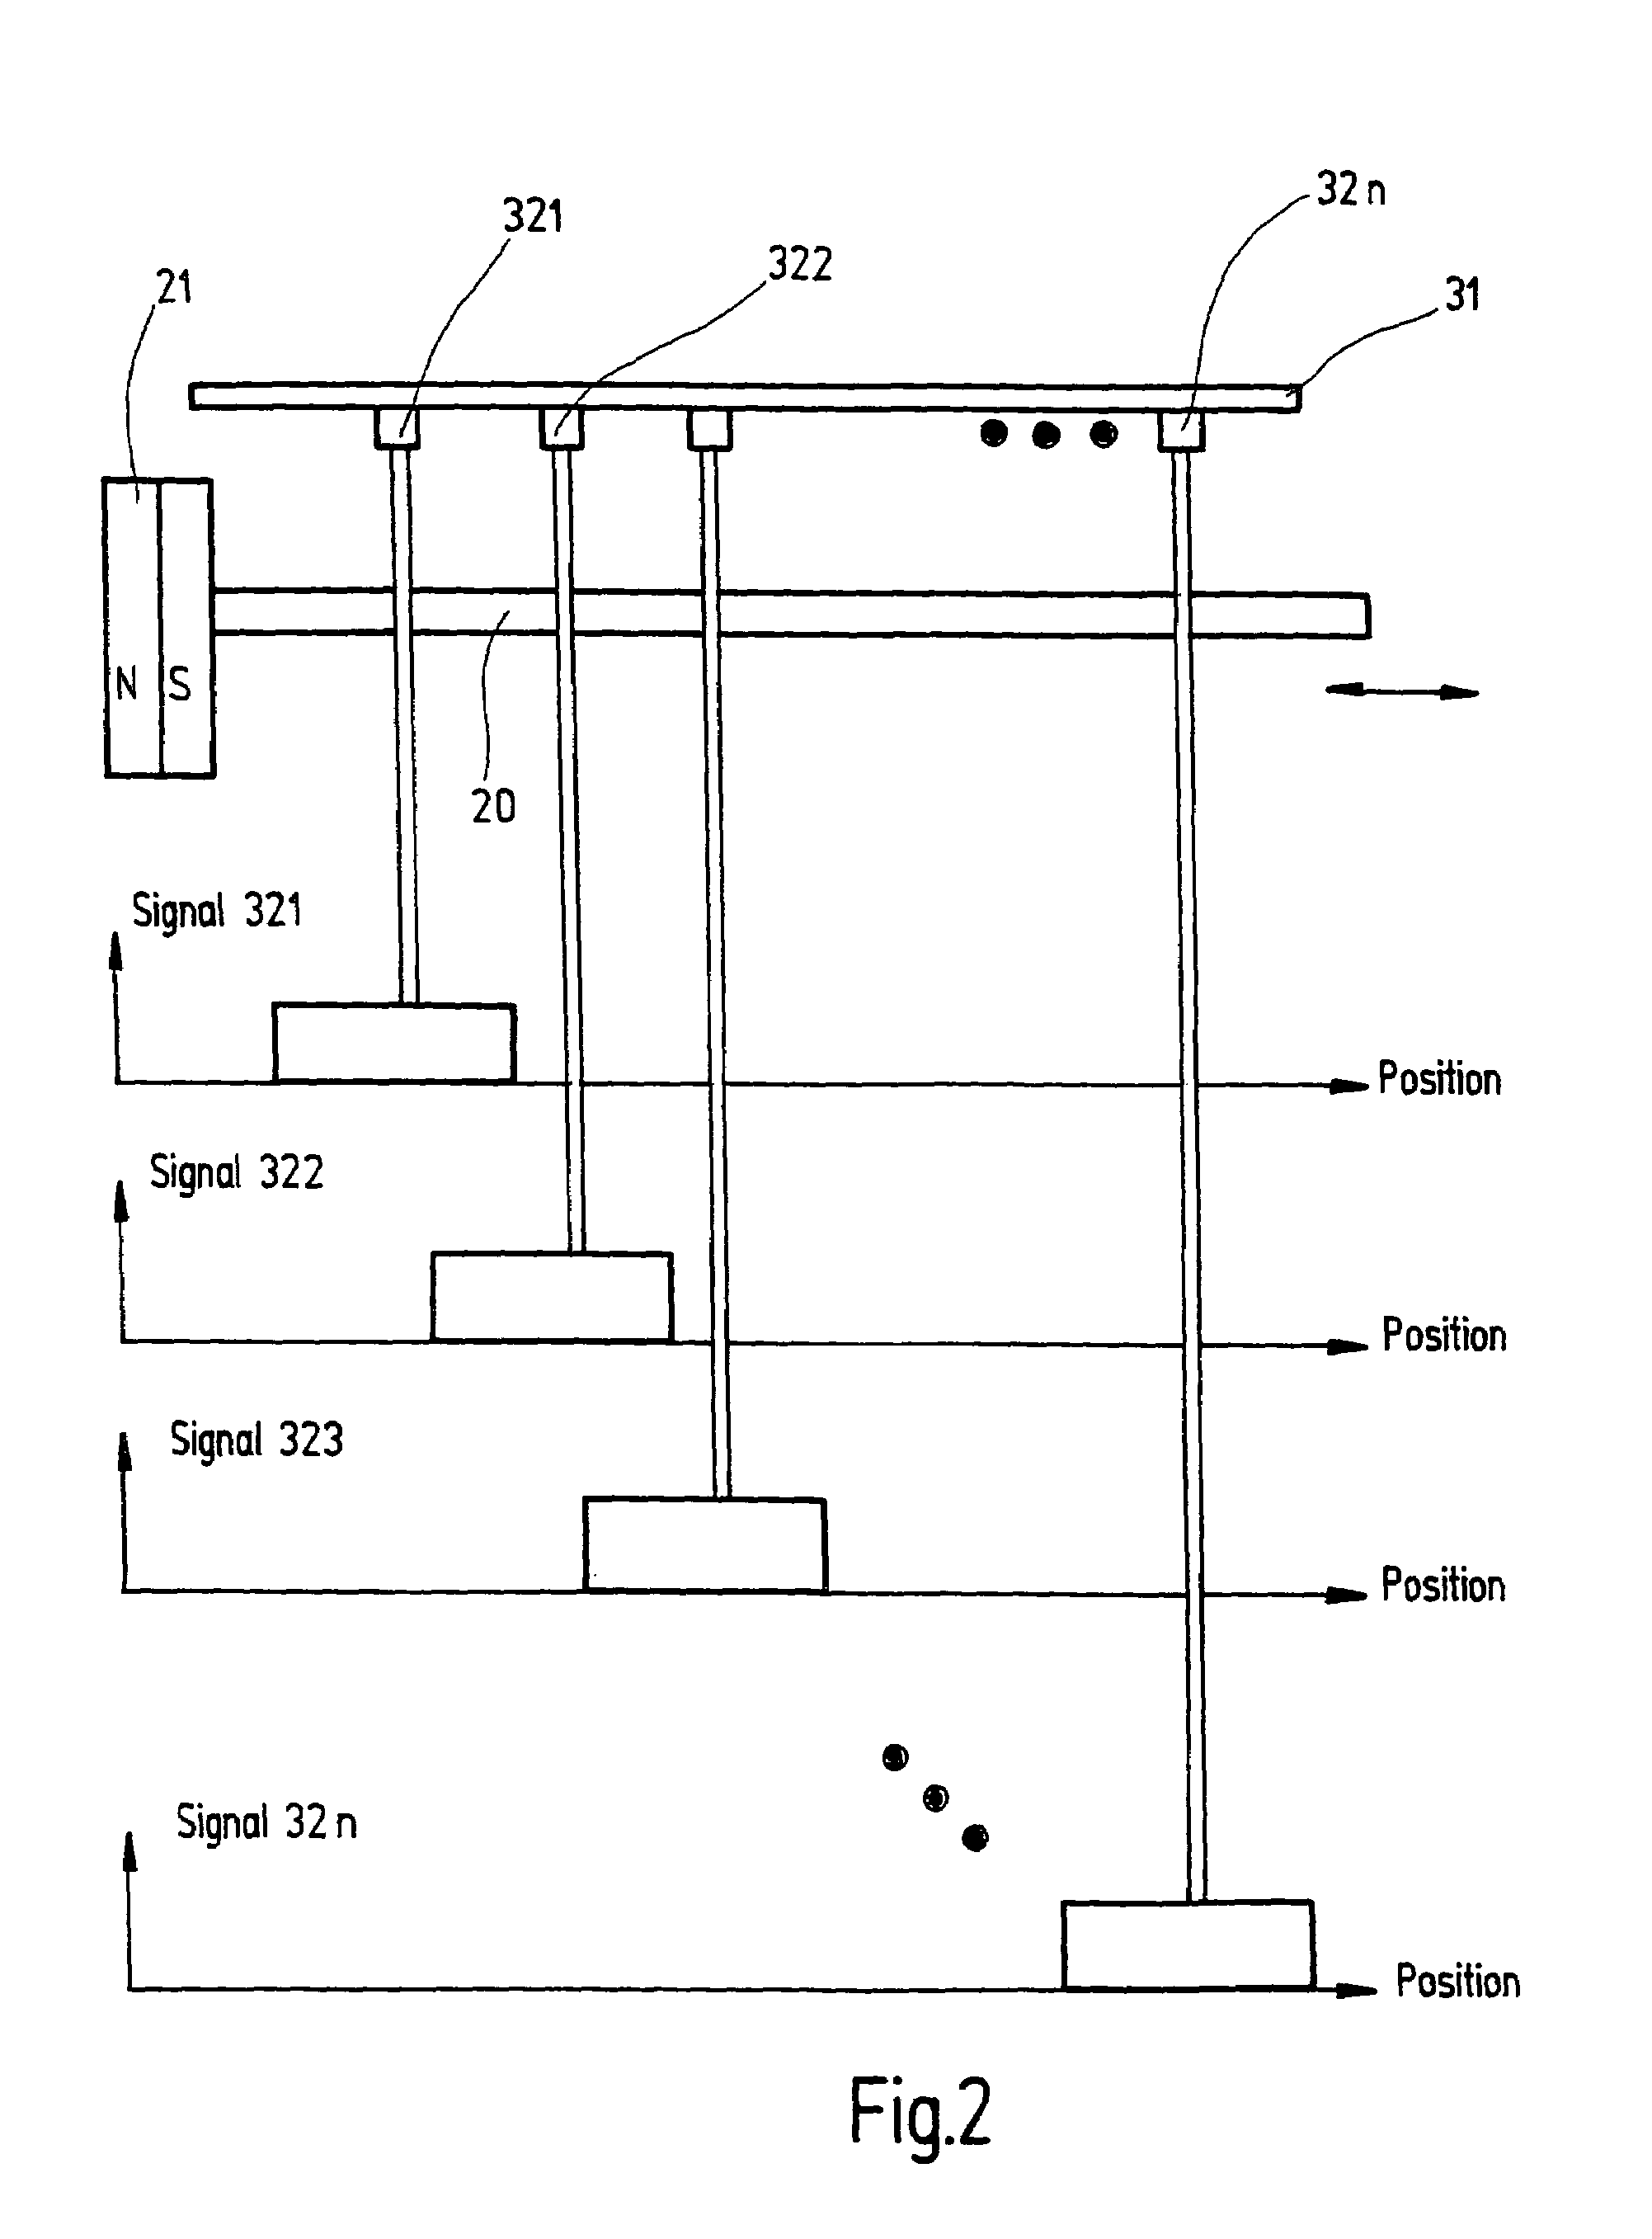 Position-measuring device for fluidic cylinder-and-piston arrangements